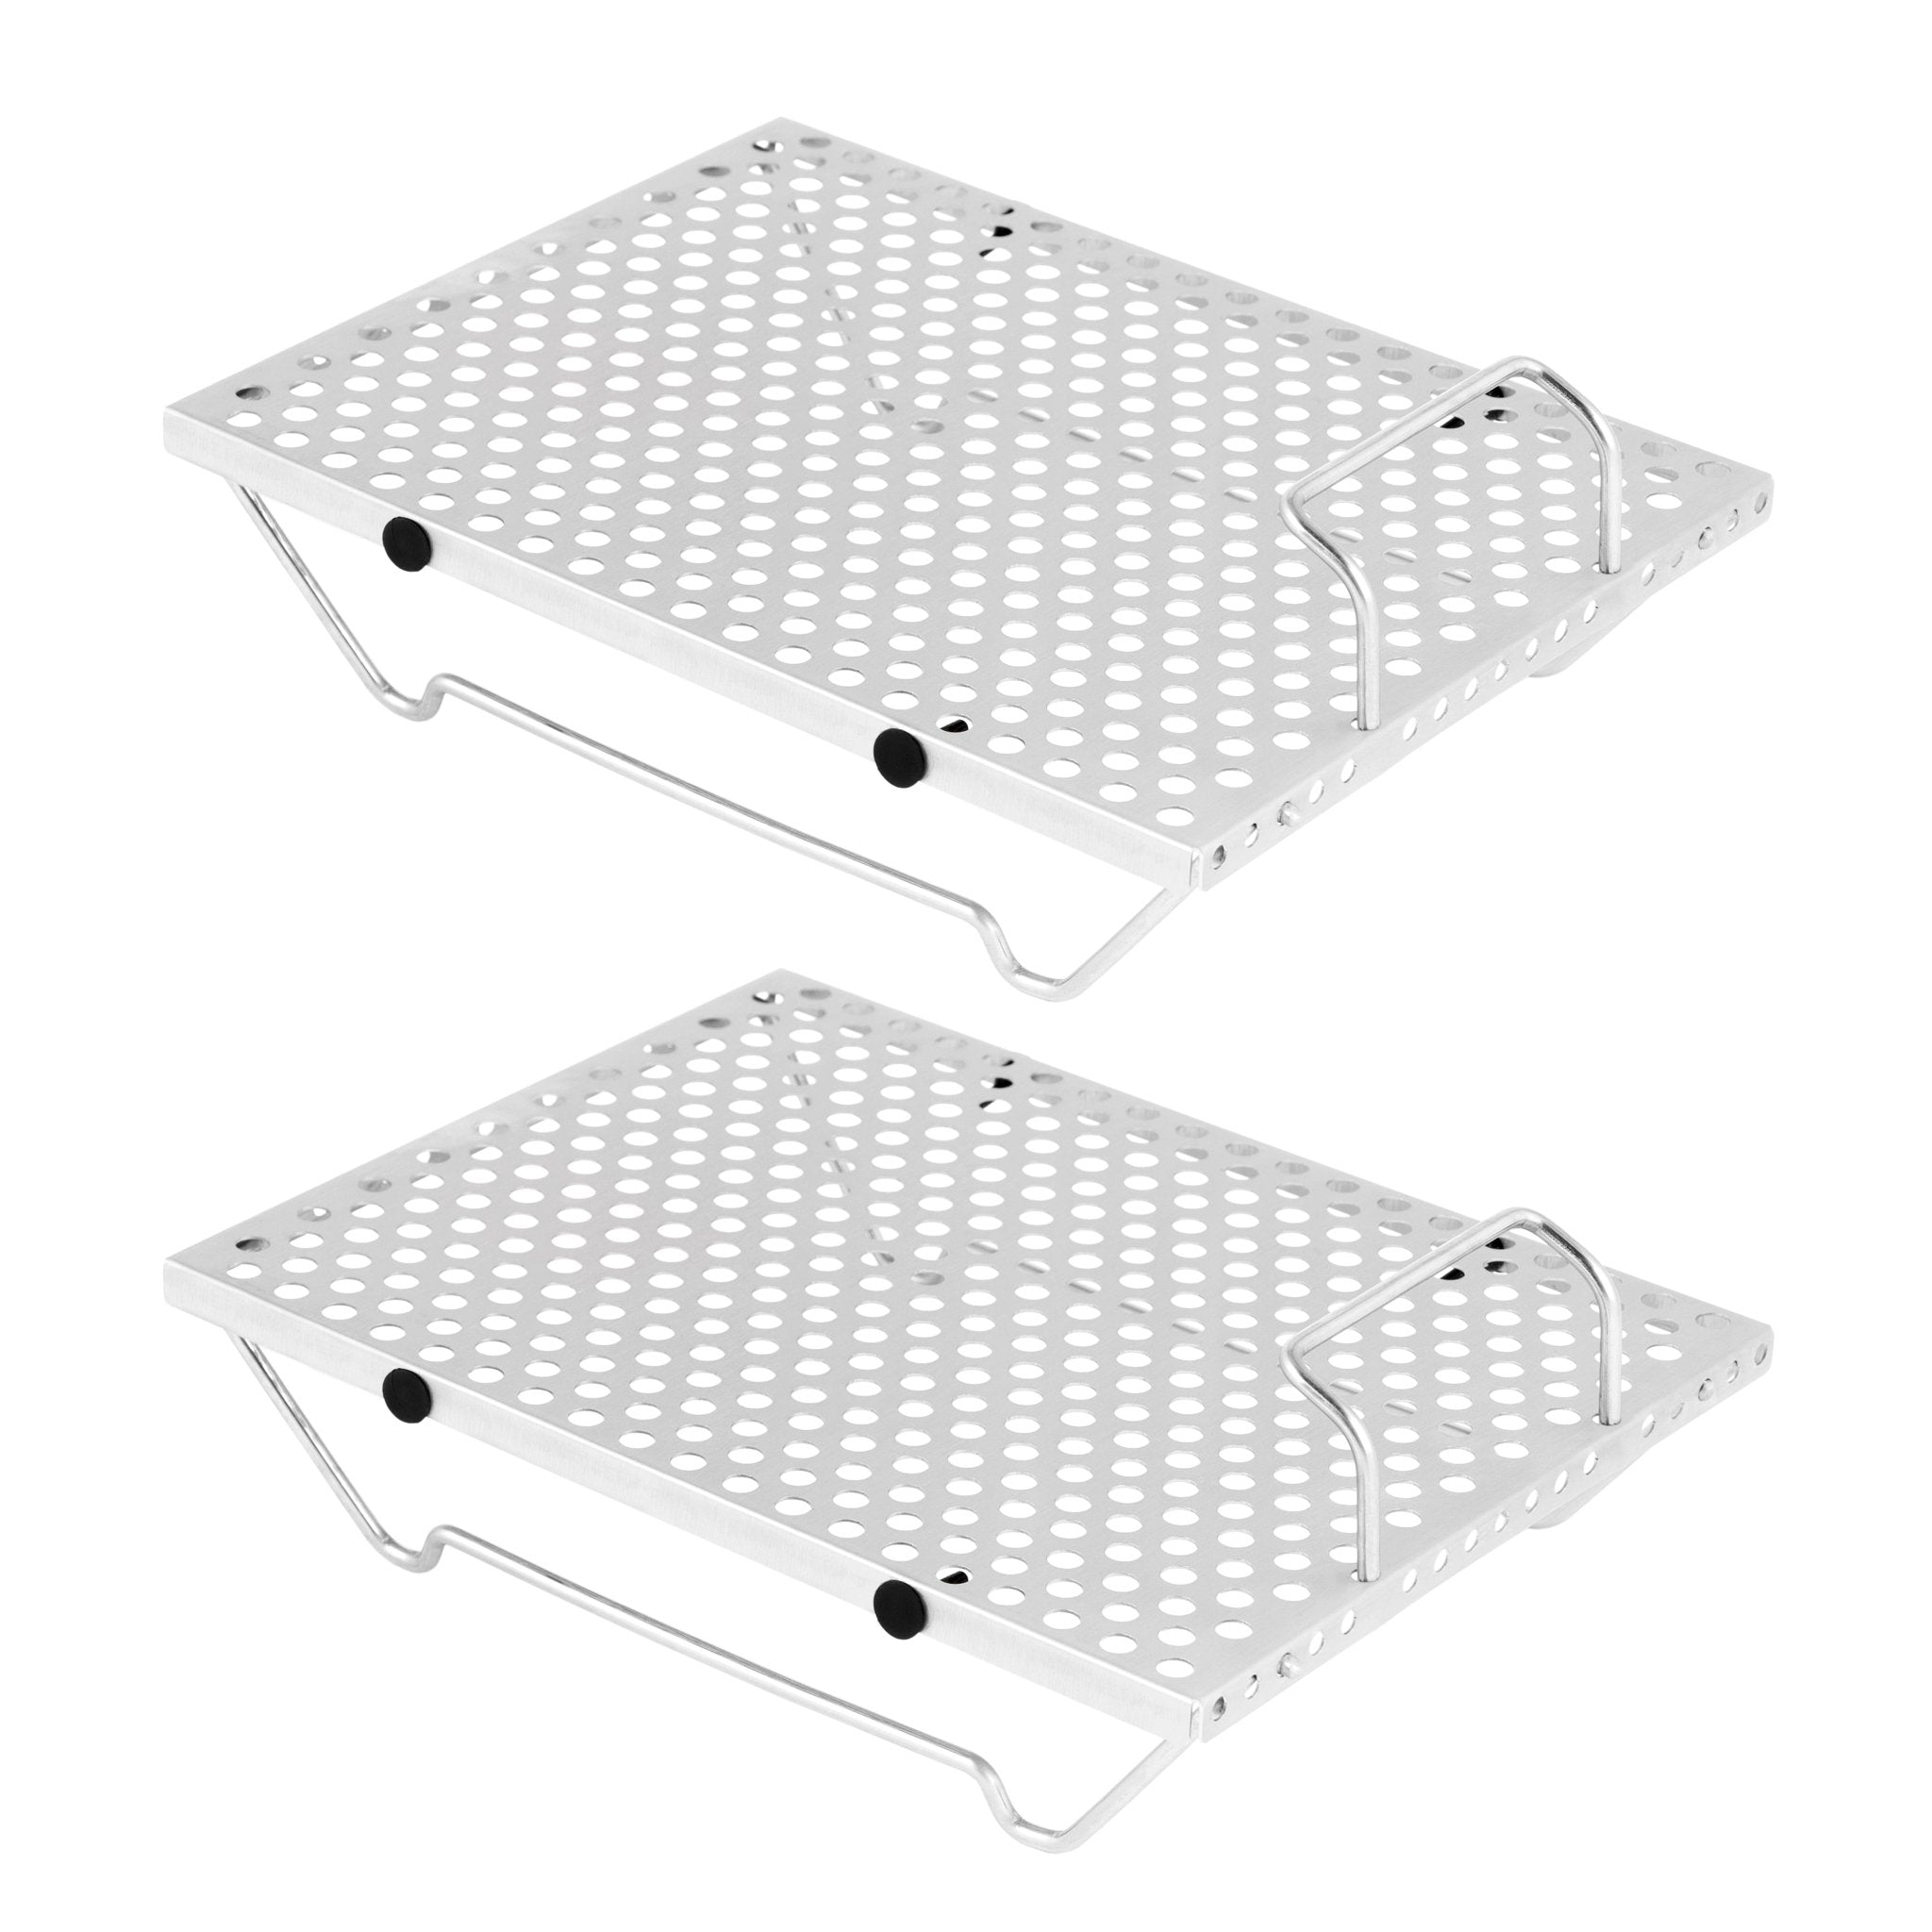 Airfryer Trivet W/ Foldable Legs (2-Pack) - Blackstone Products